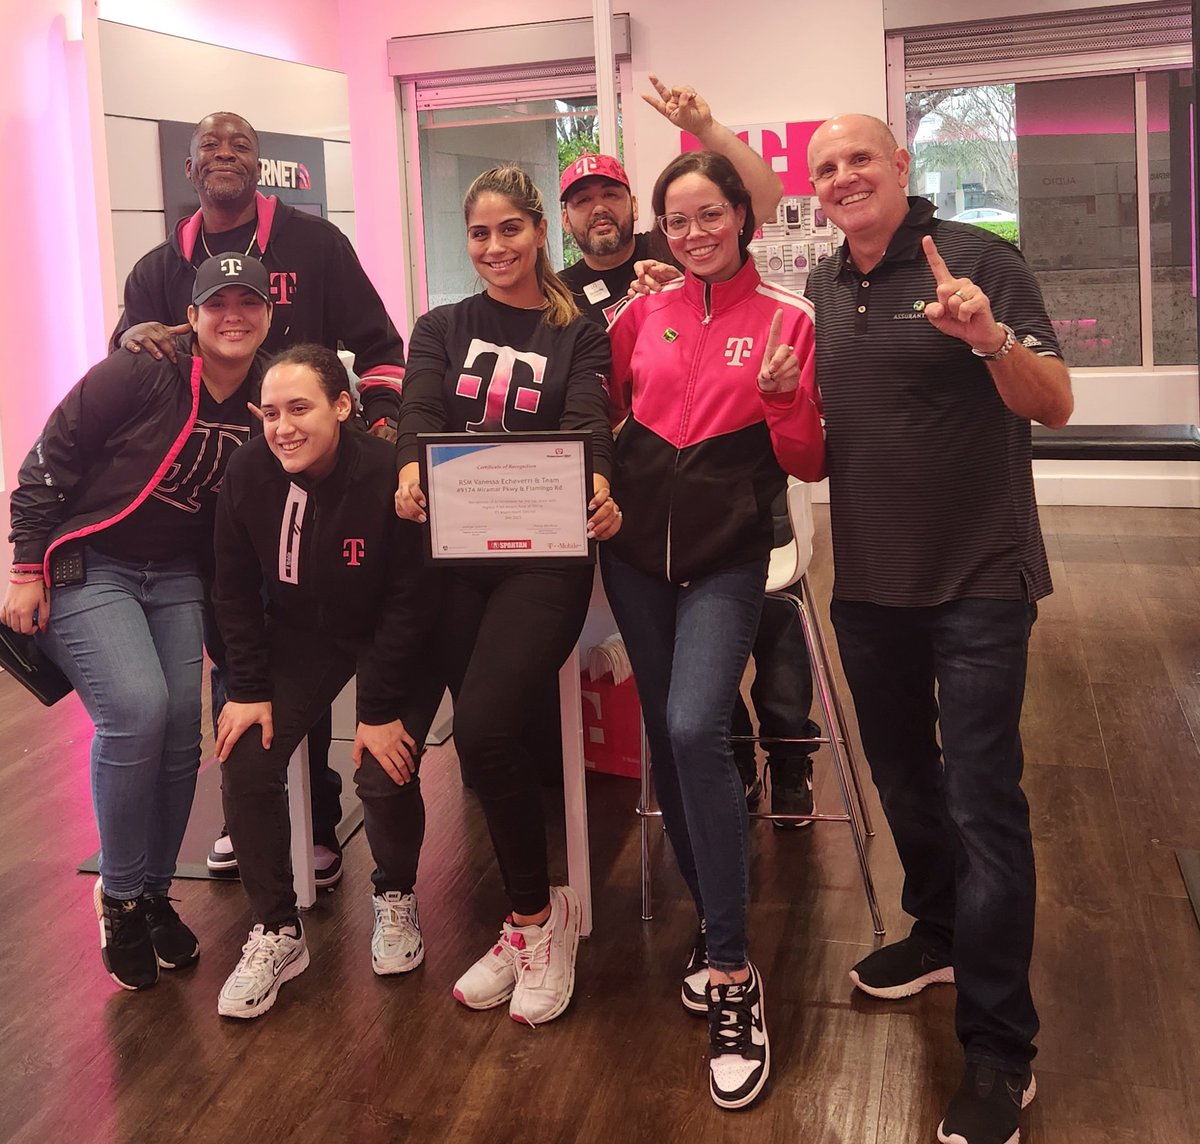 Celebrating P360 Excellence today with # Miramar & Flamingo Team @TMO_Vane for finishing top performing store in December in P360 in the Miami North Market! @ArenEscandon They plan to do it again in Jan! So proud of them! #P360BetterCX @pattyc101 @OJP305 @jorge_alvarez33